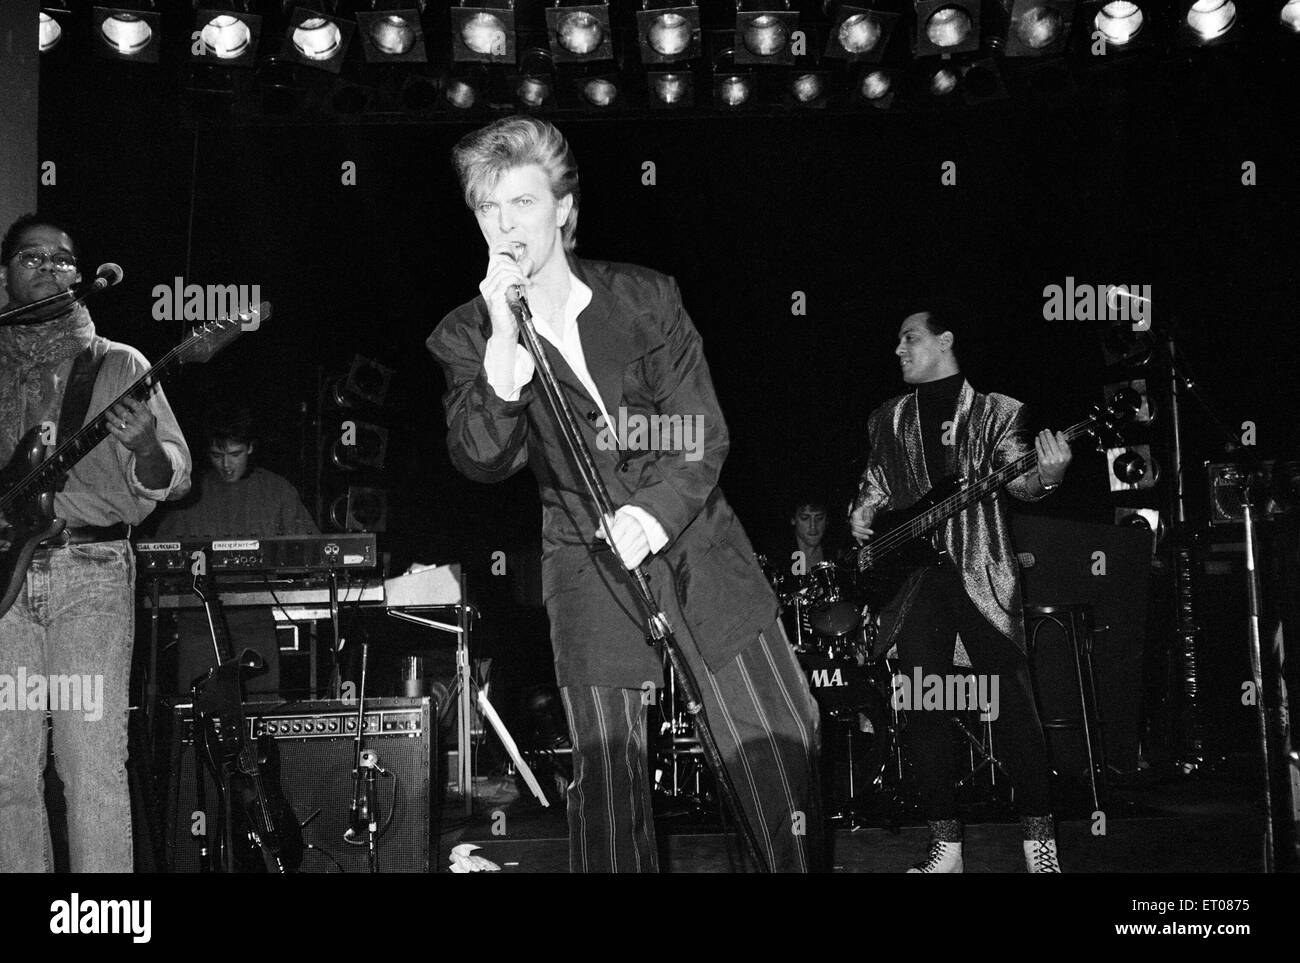 British pop singer David Bowie performing on stage. 21st March 1987. Stock Photo